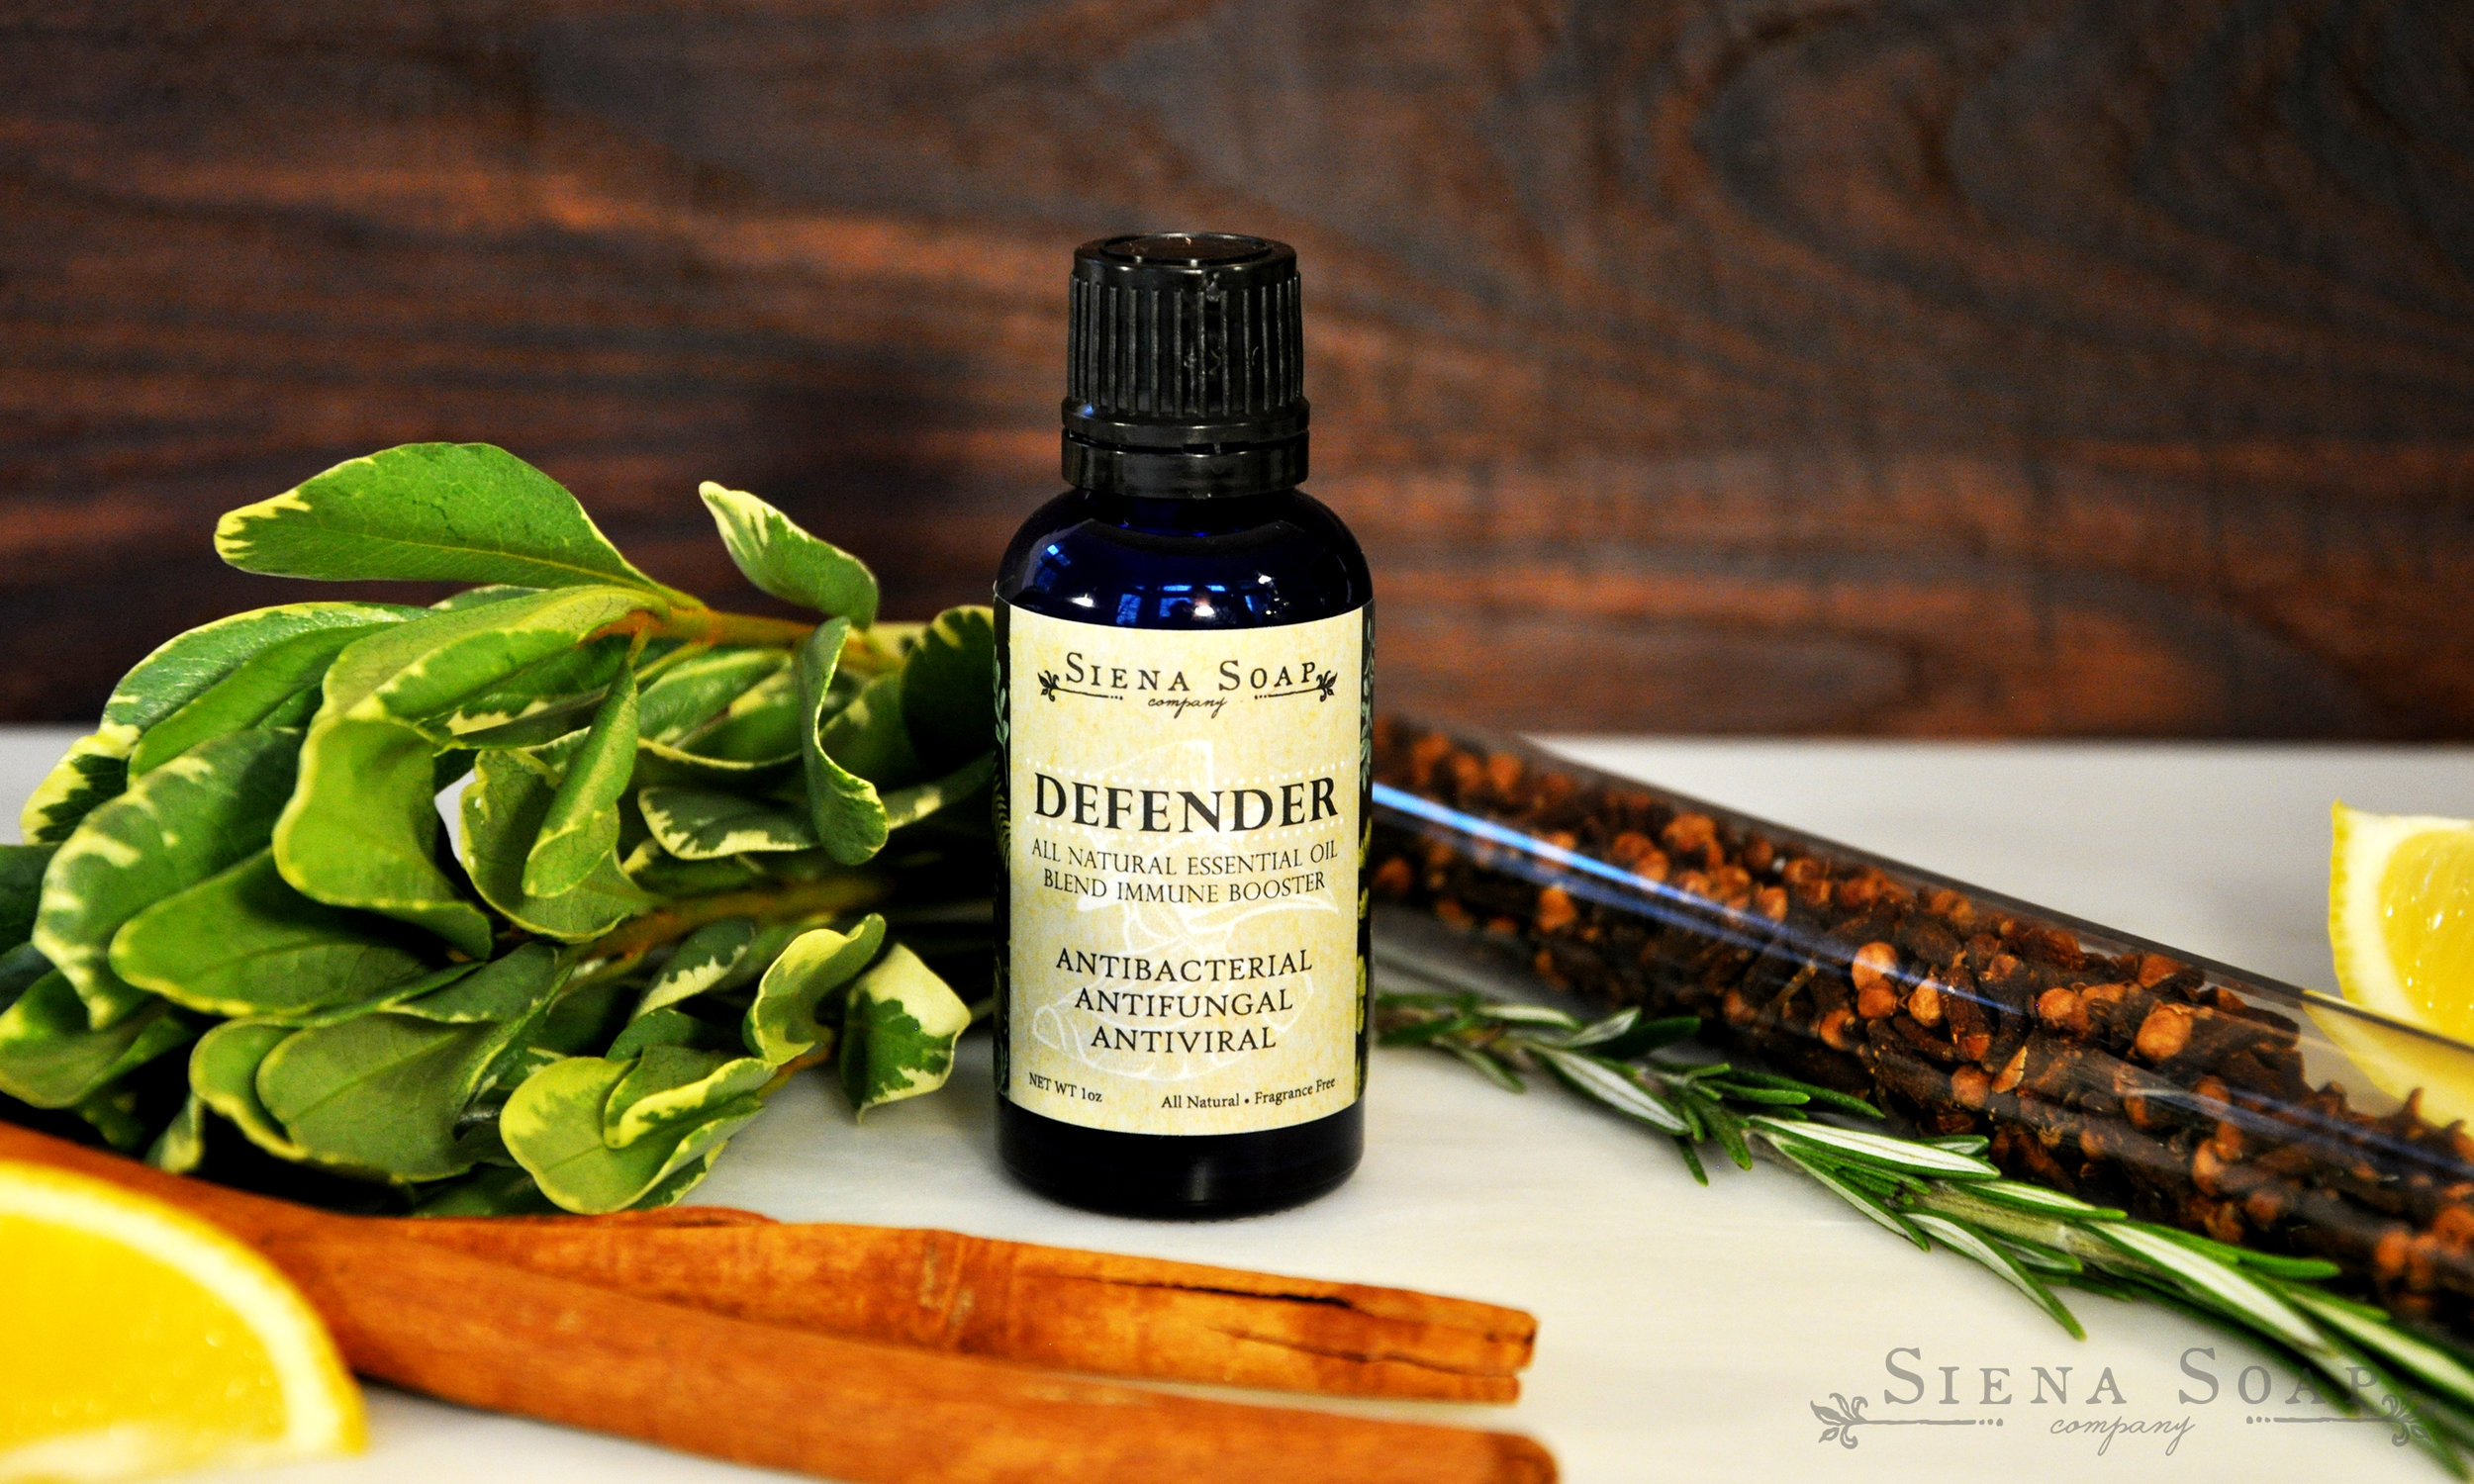 DEFENDER (FORMALLY KNOWN AS FOUR THIEVES) OIL — Siena Soap Company